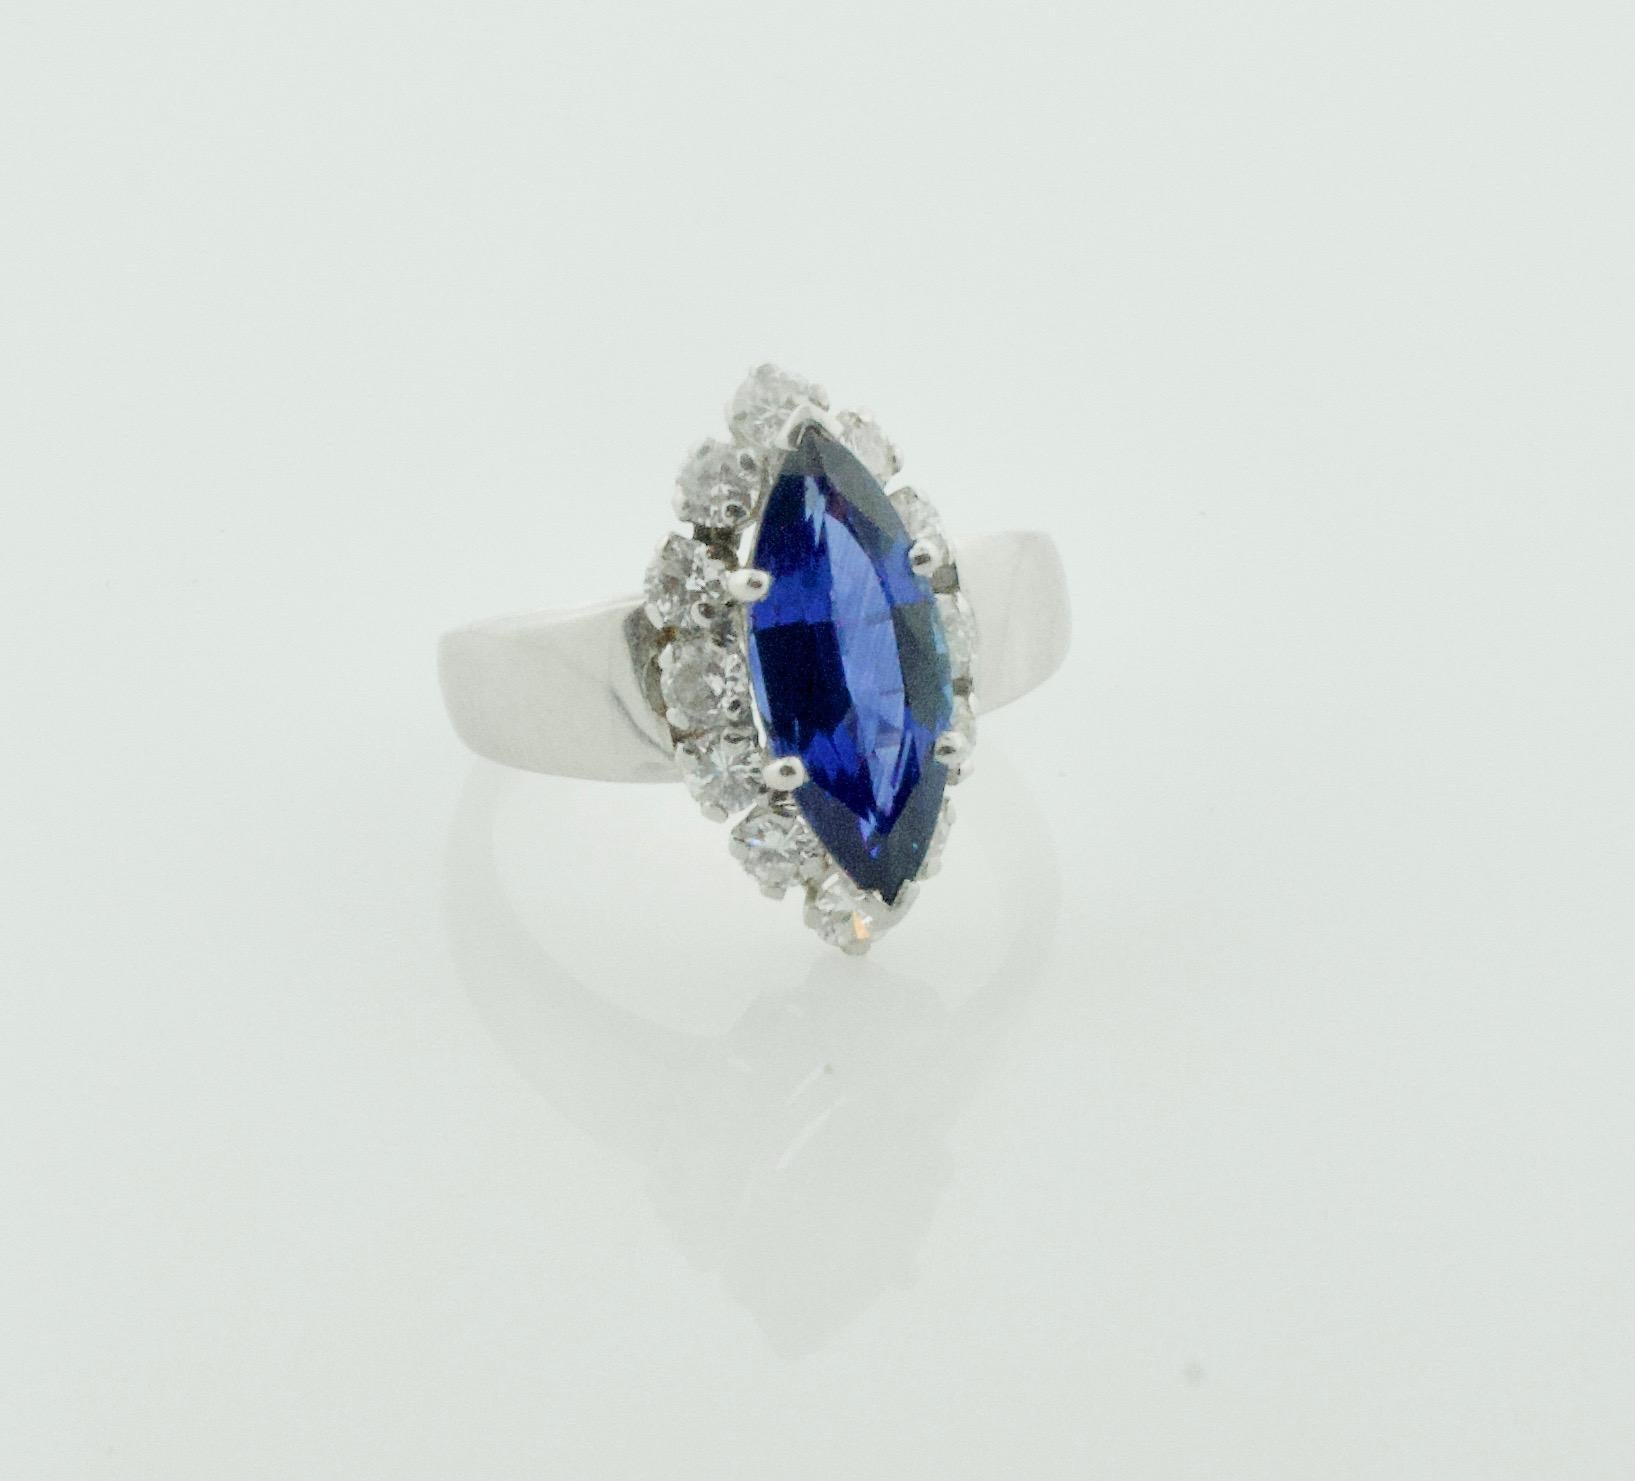 Marquise Cut Sapphire and Diamond Ring in Platinum Circa 1960's
One Marquise Cut Sapphire Weighing 3.20 Carats Approximately [bright with no imperfections visible to the naked eye]
Twelve Round Brilliant Cut Diamonds Weighing 1.00 Carats